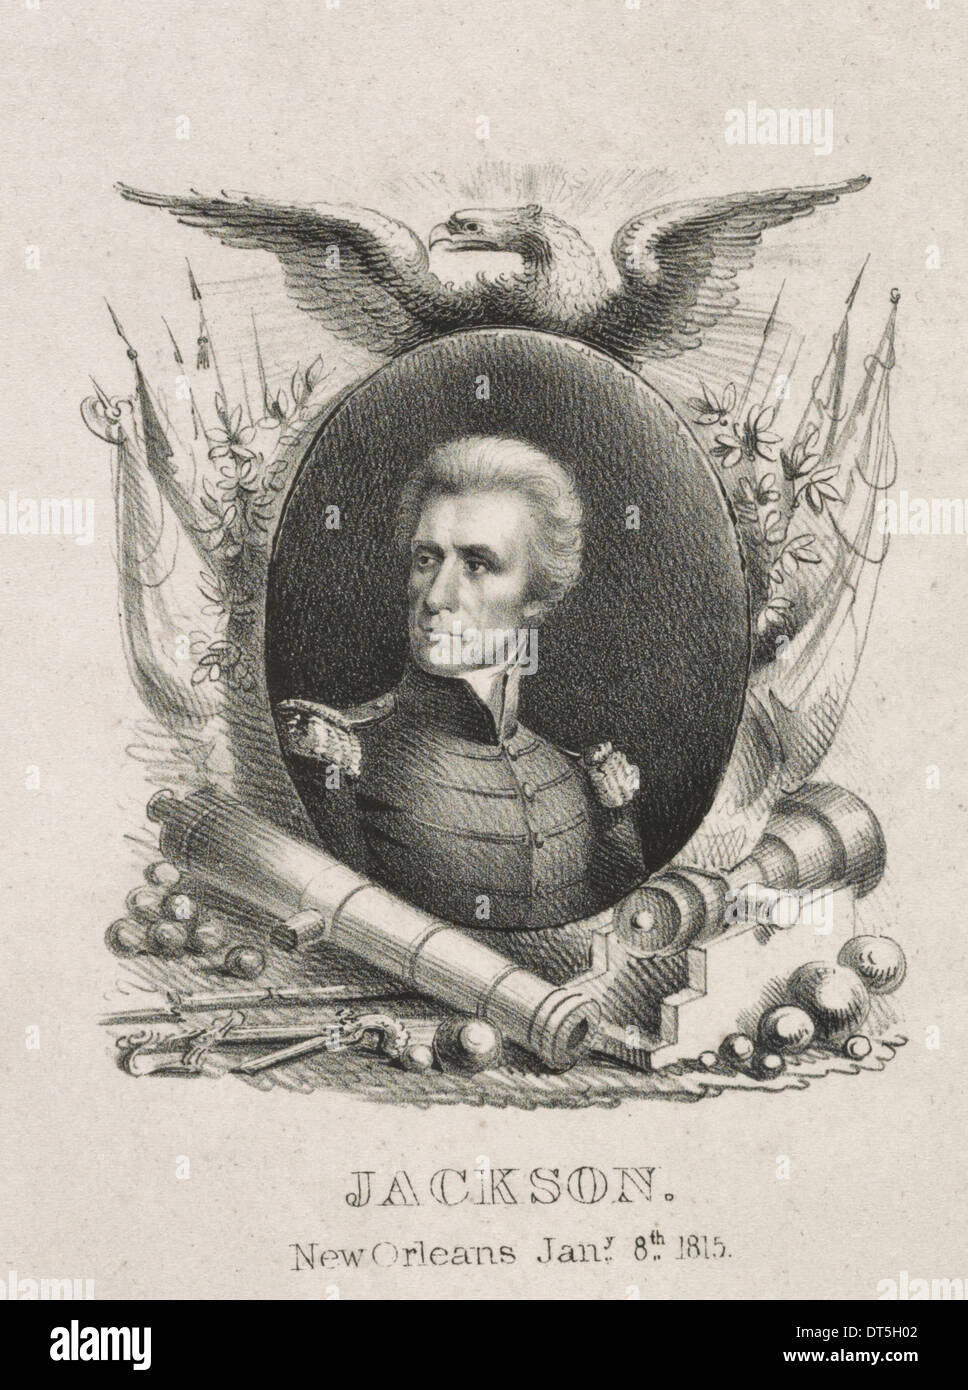 An emblematic portrait of Andrew Jackson, invoking his past as a military hero and especially his victory at the Battle of New Orleans in 1815. Jackson's bust portrait in uniform appears on an oval medallion surrounded by cannon, flags and other military paraphernalia, and surmounted by an eagle. The print seems to be a campaign piece, issued probably during the 1832 presidential race rather than that of 1828, when Jackson was also a candidate. Stock Photo